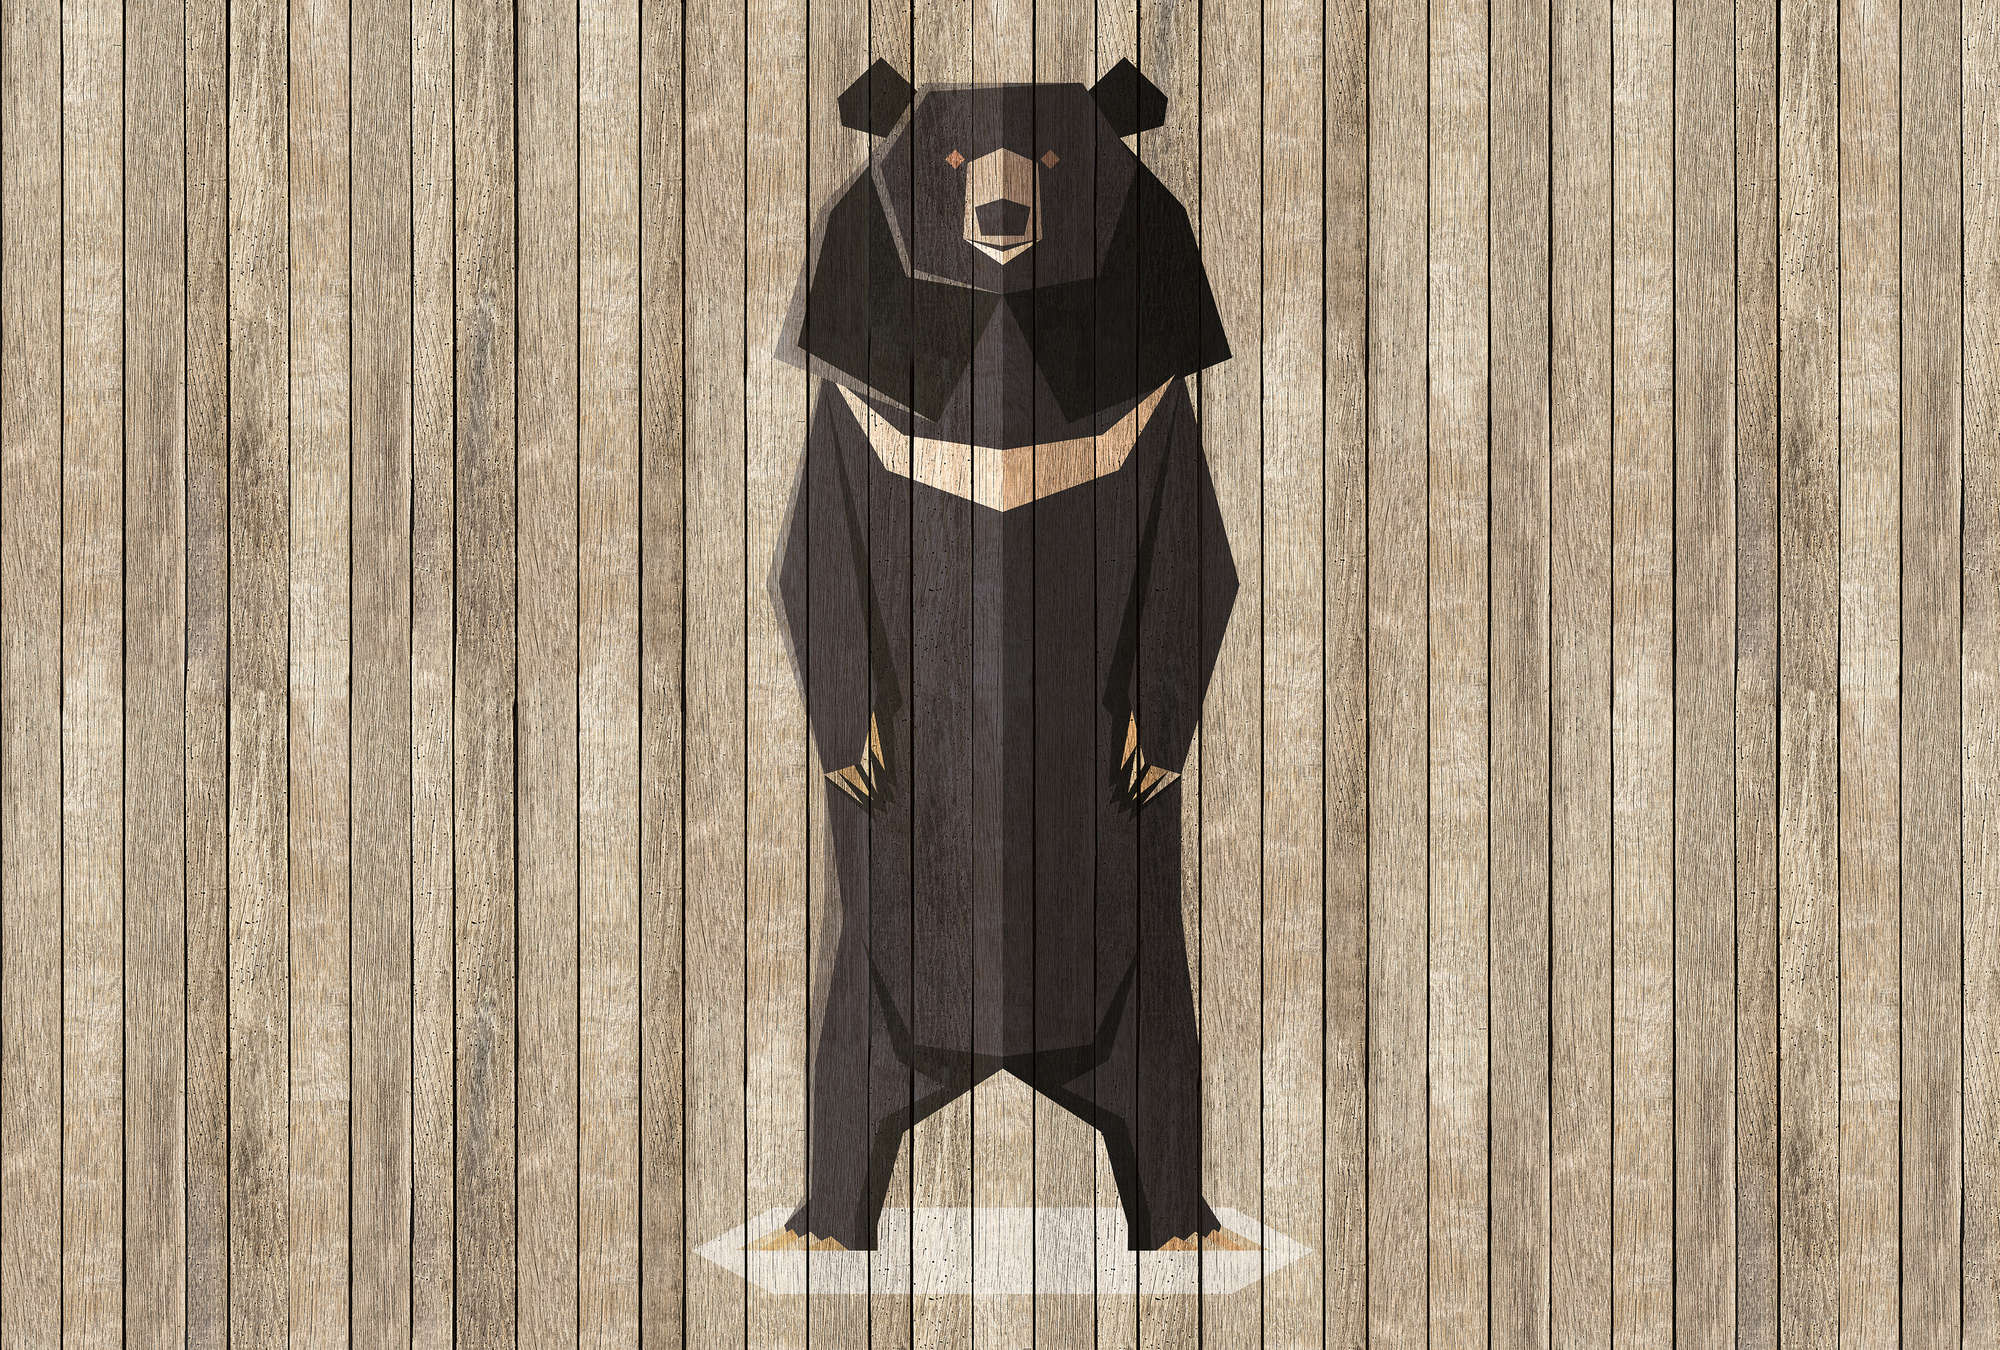             Born to Be Wild 1 - Board Wall Wallpaper with Bears - Wooden Panels Wide - Beige, Brown | Pearl Smooth Non-woven
        